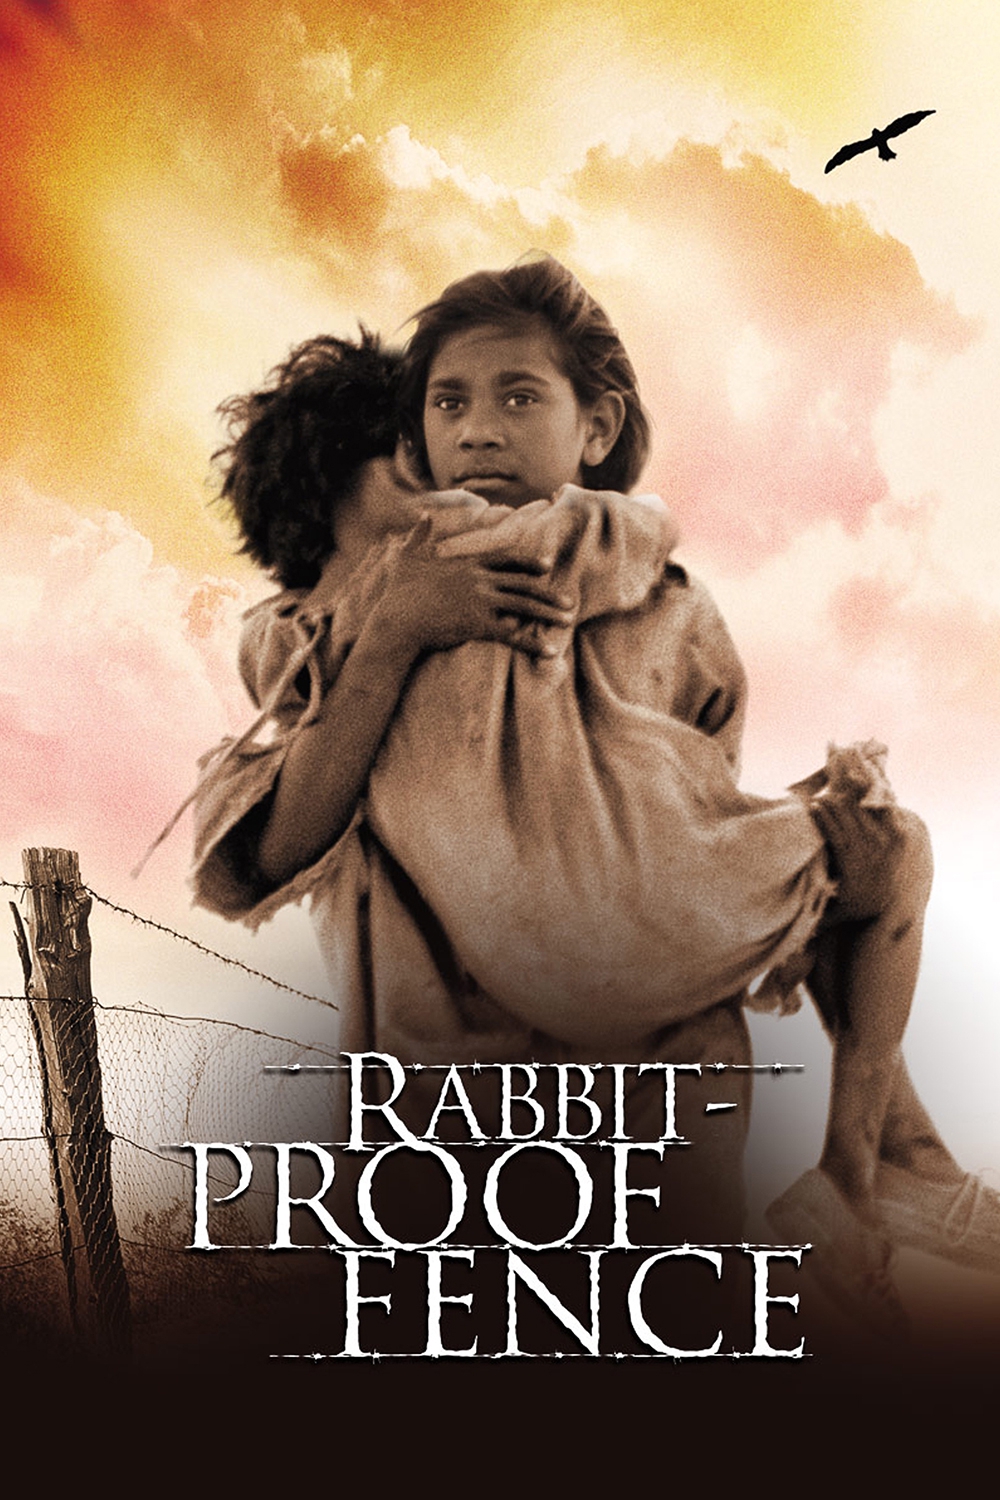 Stream Rabbit Proof Fence Online Download and Watch HD Movies Stan